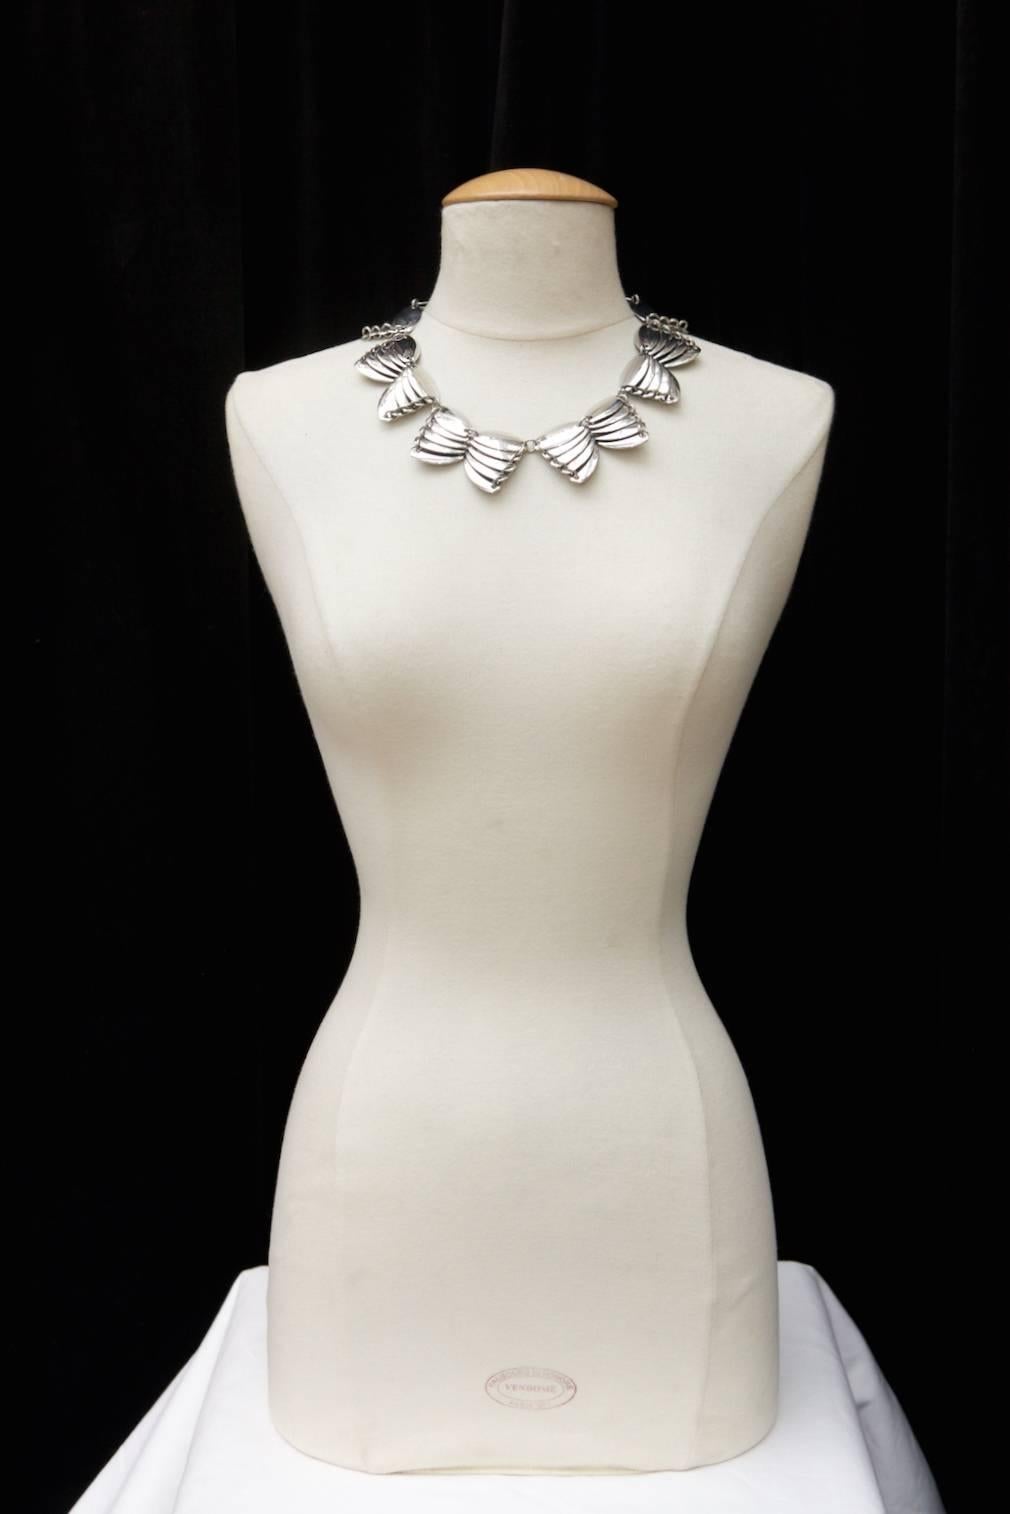 PACO RABANNE Necklace composed of several petals of silver metals articulated figuring several butterflies. 

It fastens with a large clasp at the rear.

This necklace is in excellent condition. 

Measurements:
Length: 48 cm - 19